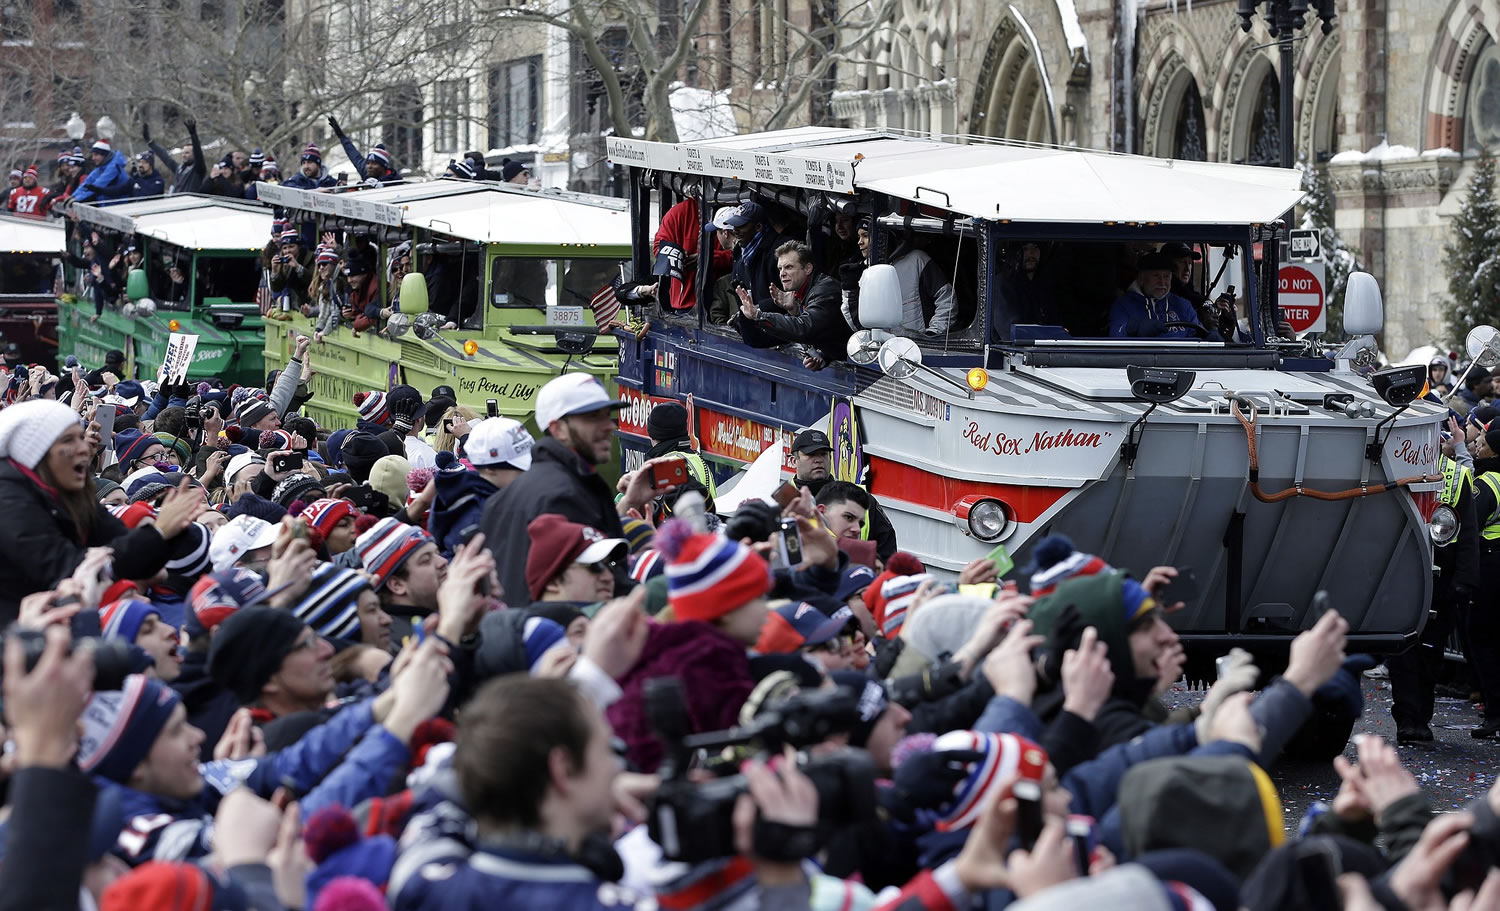 New England Patriots fans cheer as the team passes by in a procession of duck boats during a parade in Boston on Wednesday to honor the Patriots' victory over the Seattle Seahawks in Super Bowl XLIX Sunday in Glendale, Ariz.